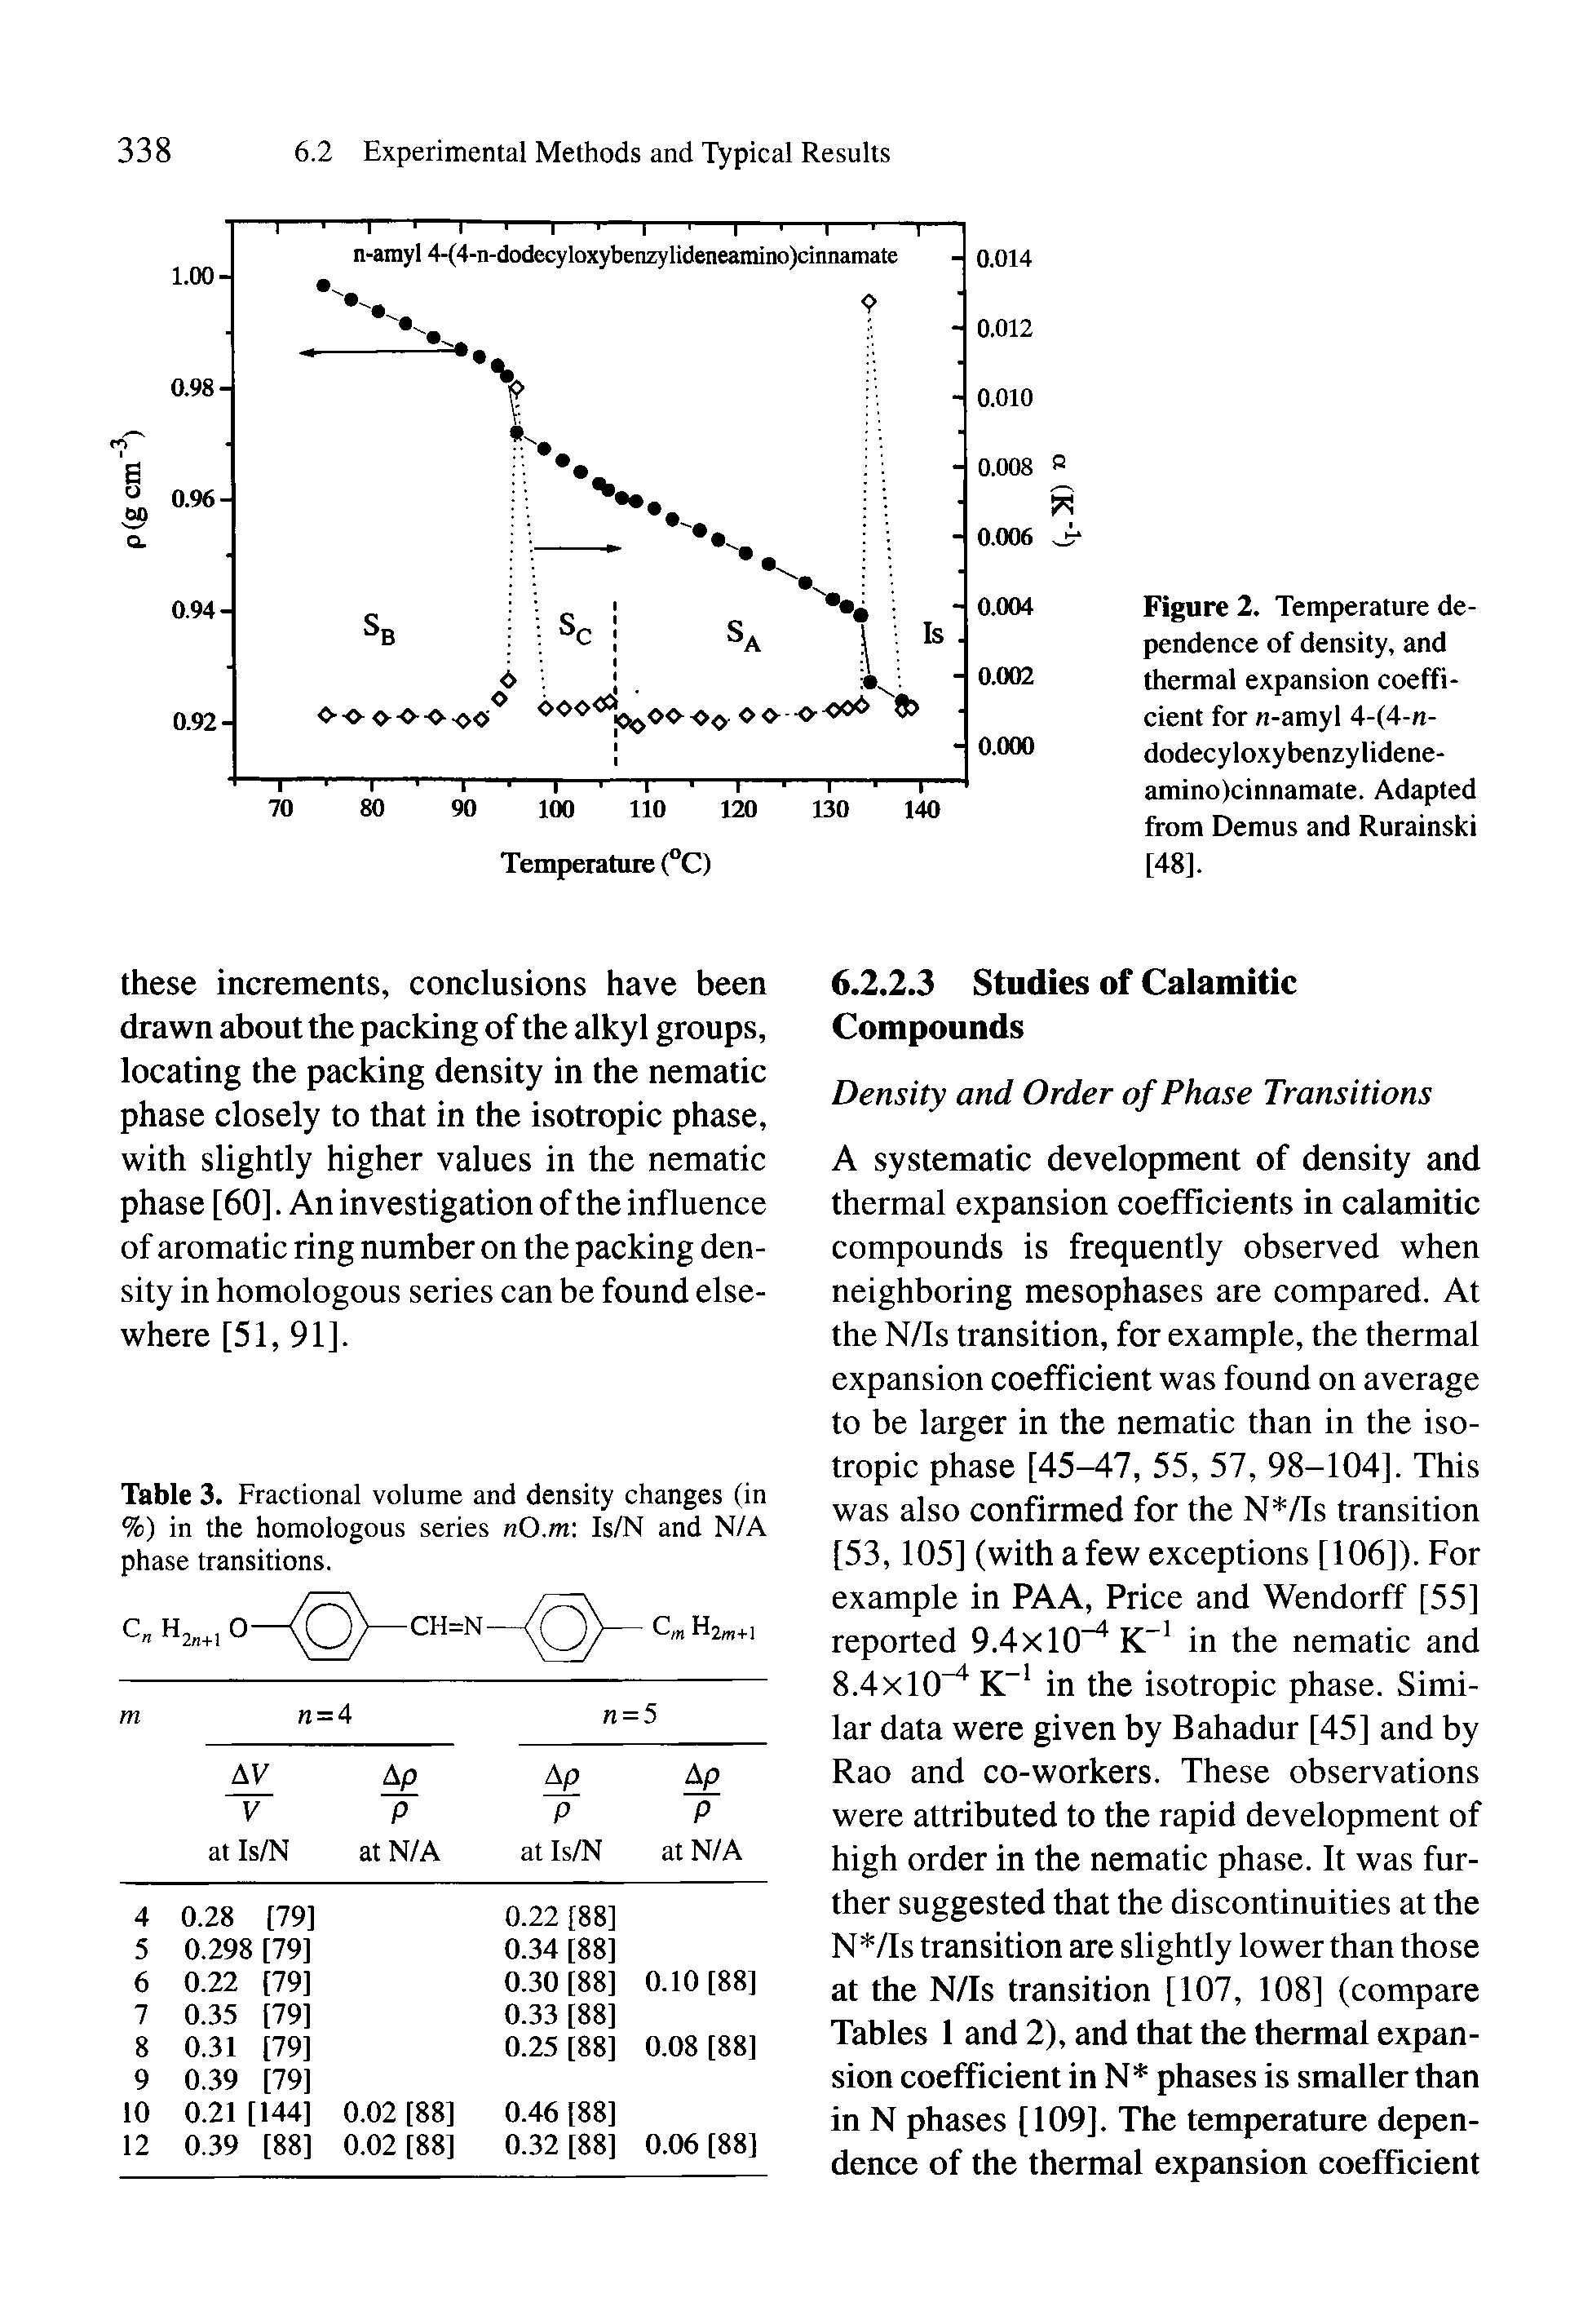 Figure 2. Temperature dependence of density, and thermal expansion coefficient for fi-amyl 4-(4-n-dodecyloxybenzylidene-amino)cinnamate. Adapted Irom Demus and Rurainski [48].